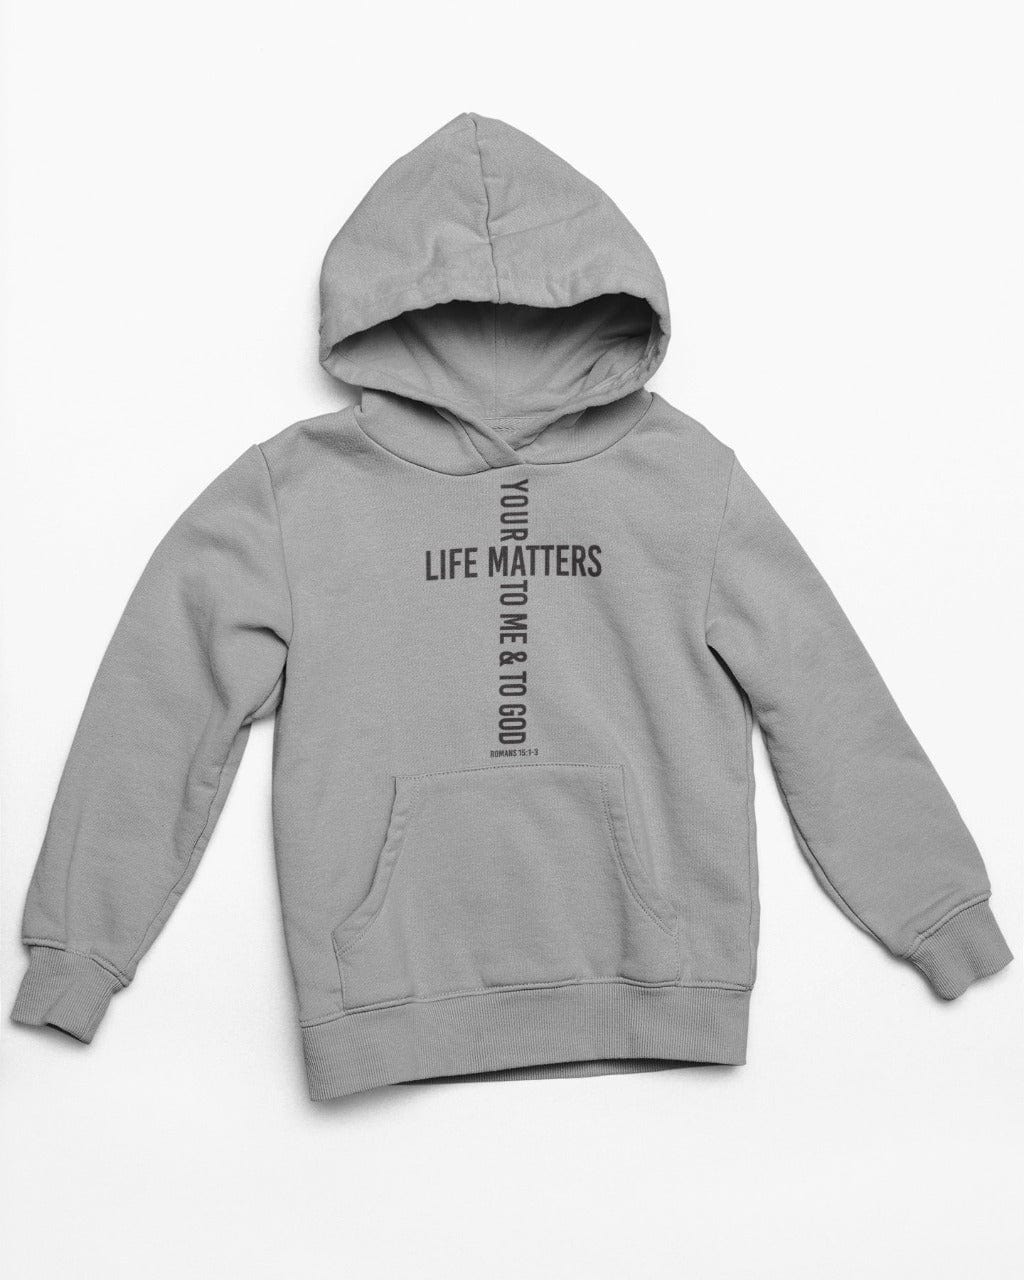 Wrighteous Wear Hoodie Ash Gray / S Your Life Matters Unisex Christian Hoodie